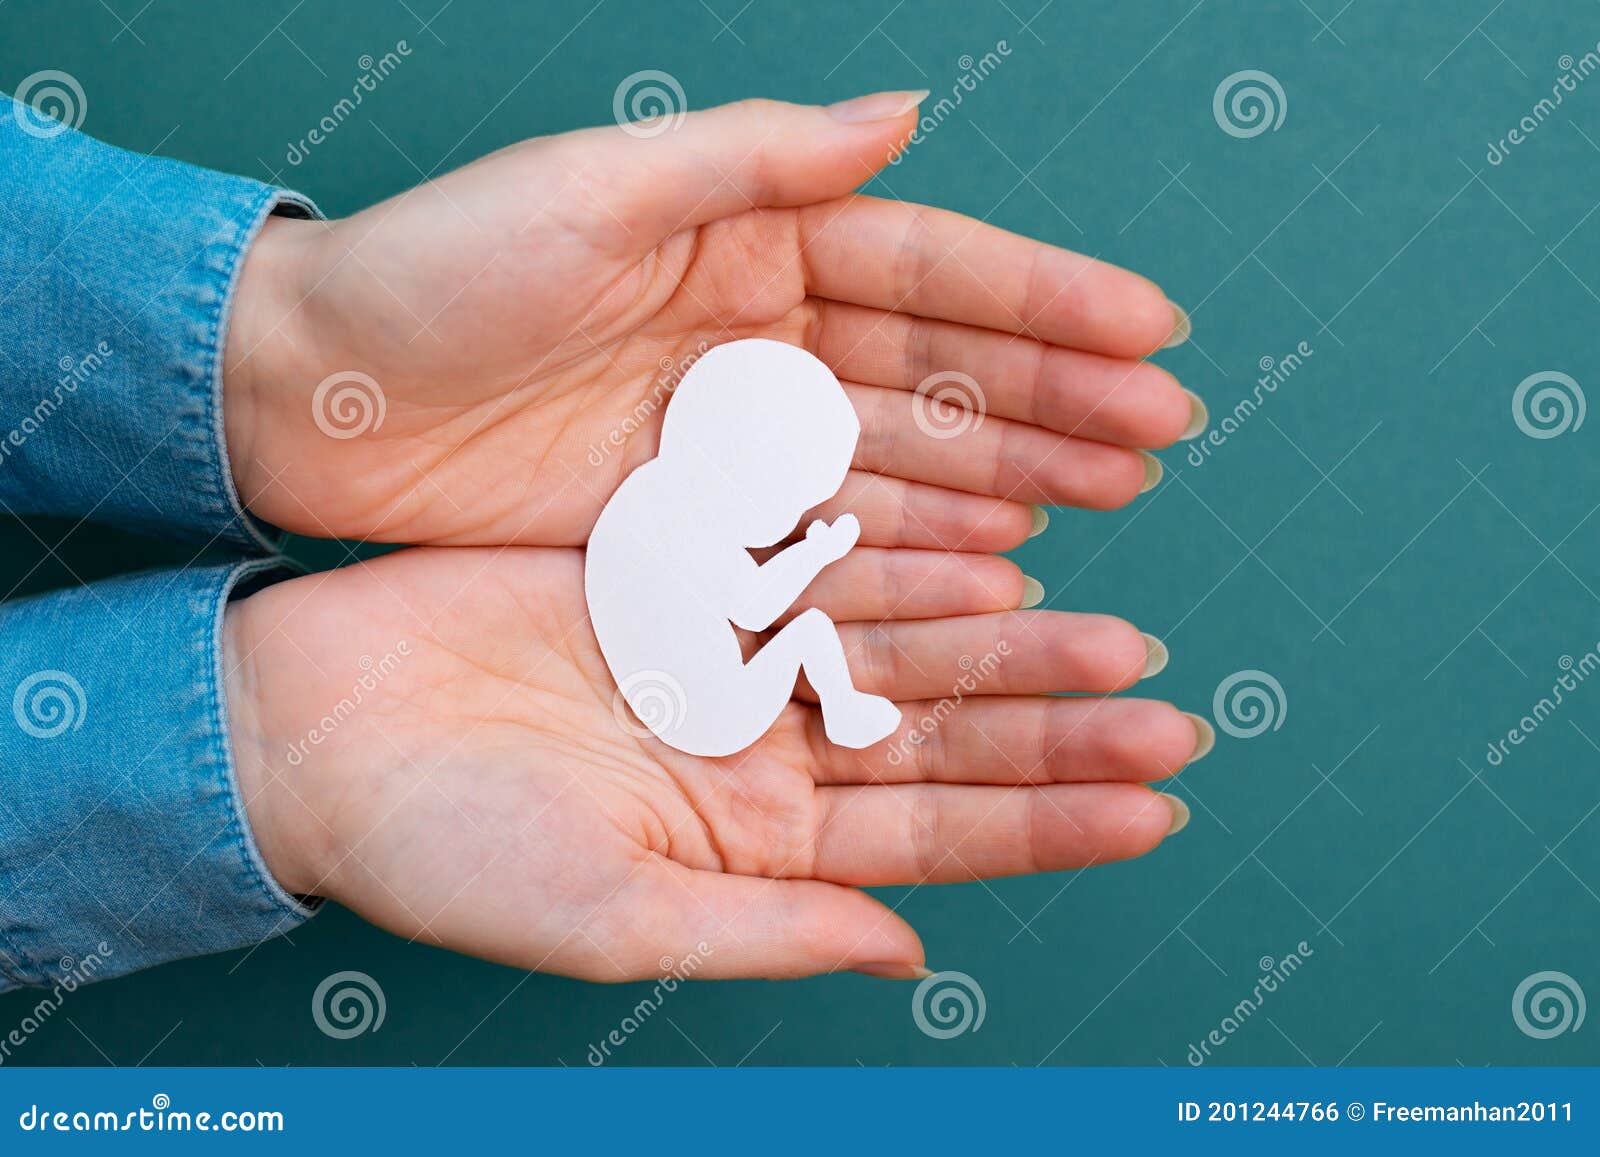 female hands hold a paper-cut silhouette of a fetus. green background. flay lay. close up. concept of artificial insemination and